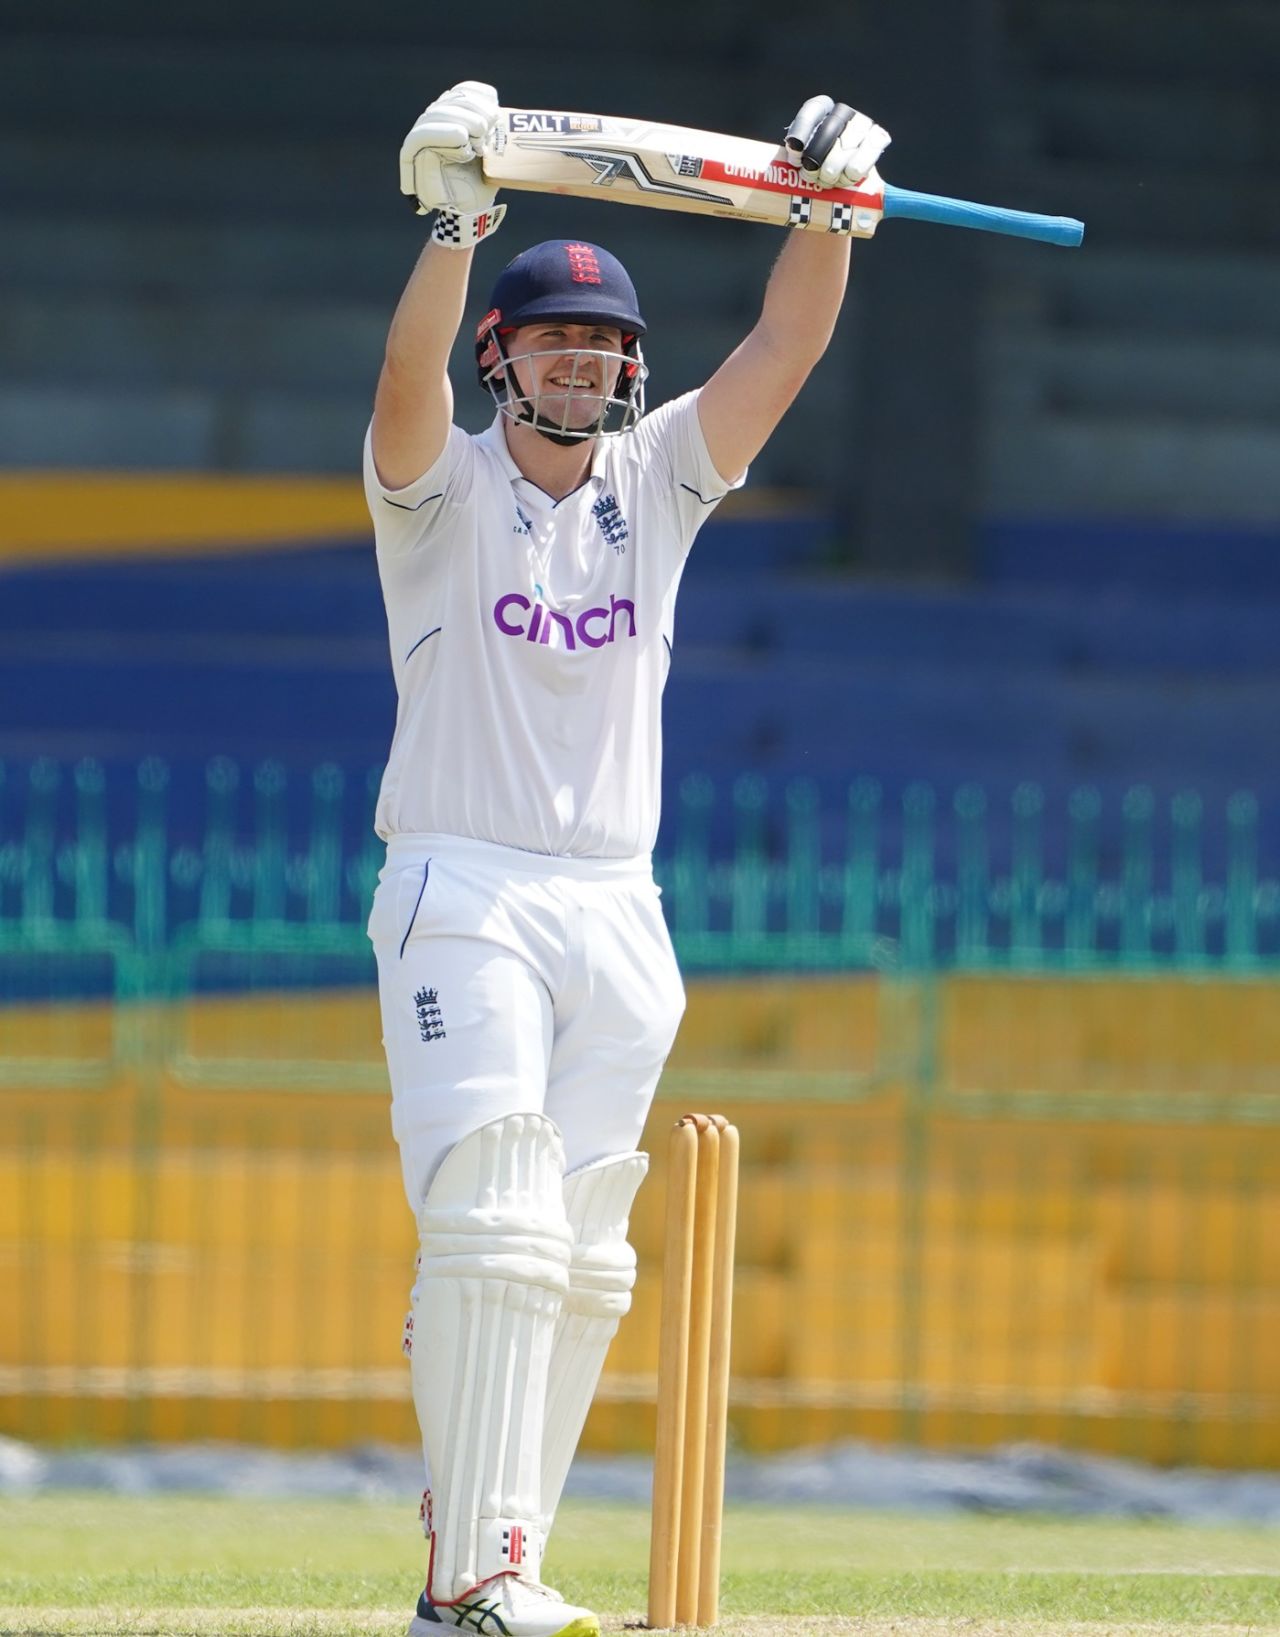 Alex Lees struck a 94-ball hundred on the opening day of England Lions' tour of Sri Lanka, SLC President's XI vs England Lions, Colombo, January 25, 2023